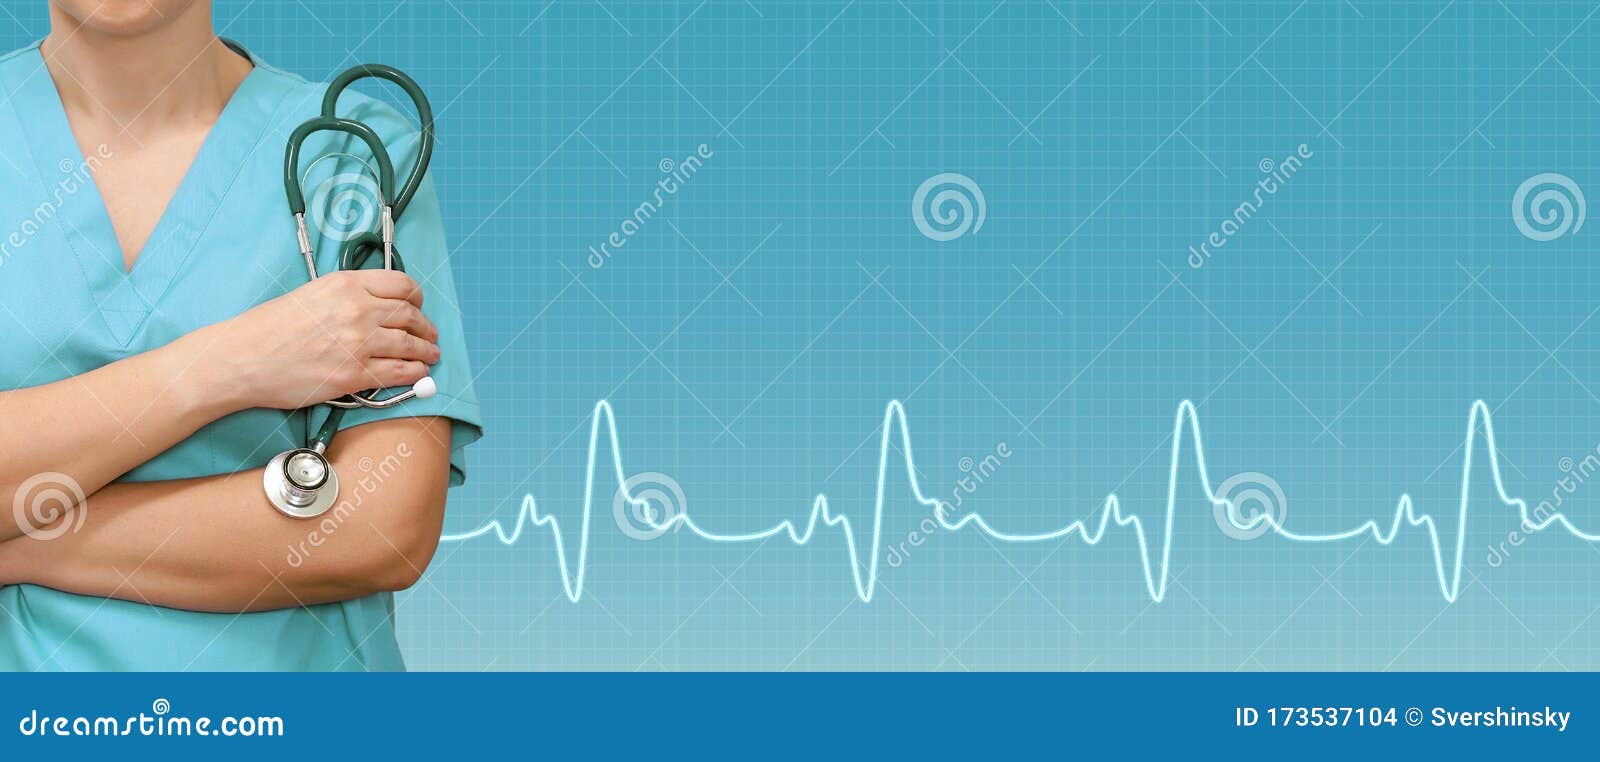 female doctor or nurse with a stethoscope in the hands and ecg line on medical green background. health care banner